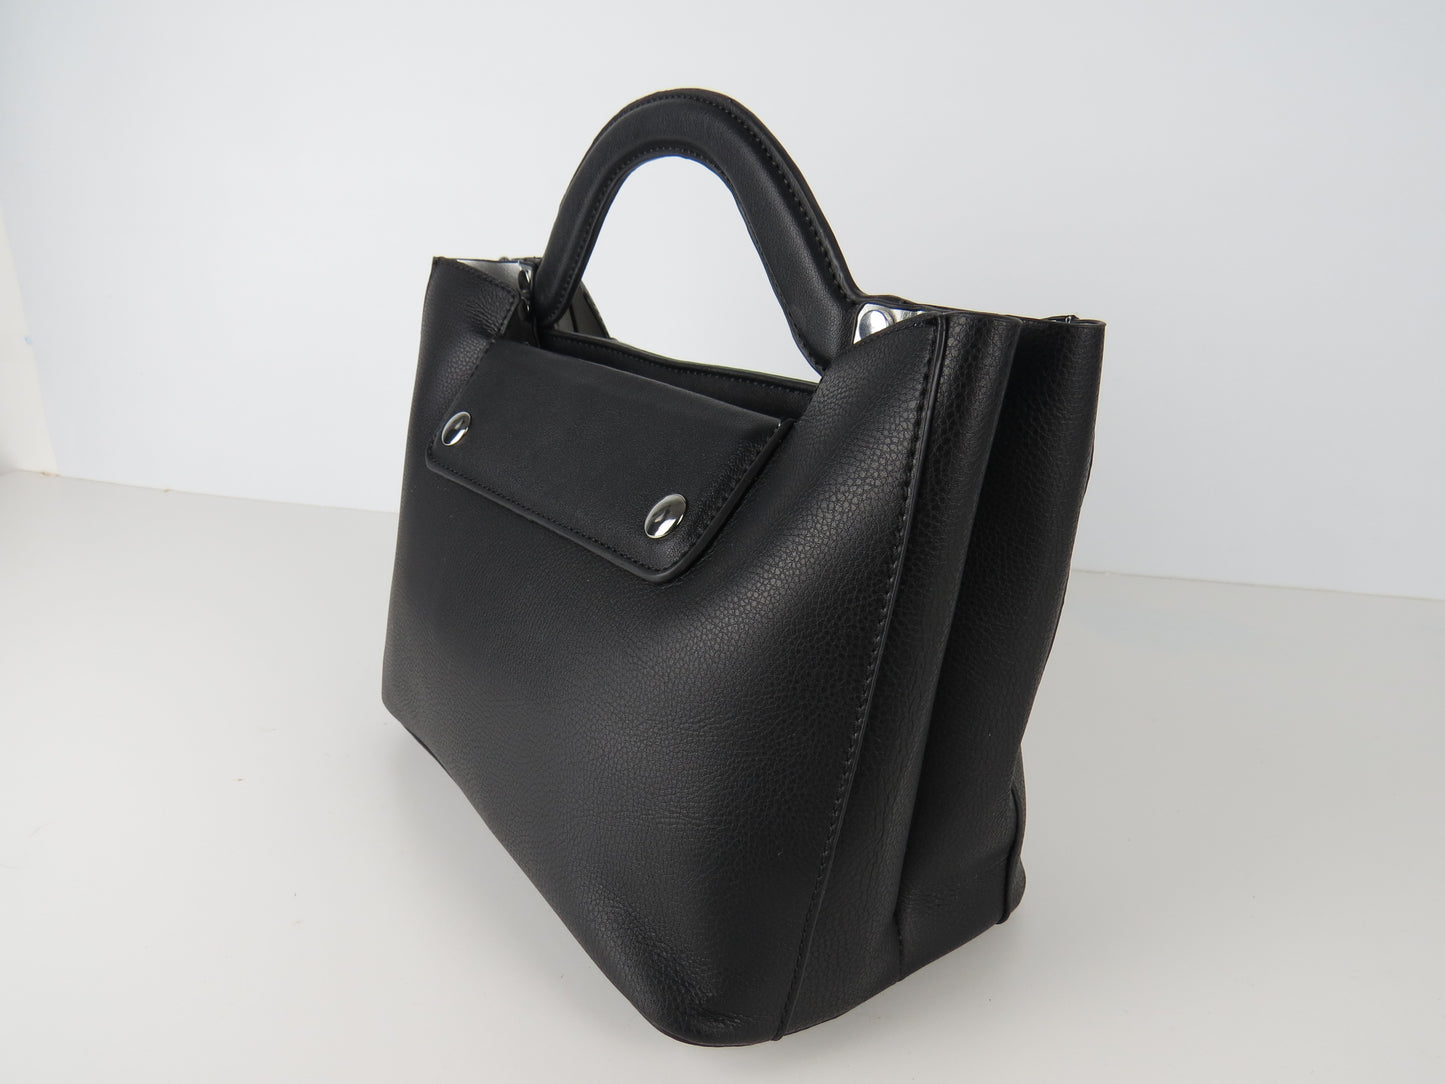 Black Faux Leather Structured Handbag With Extra Long Strap